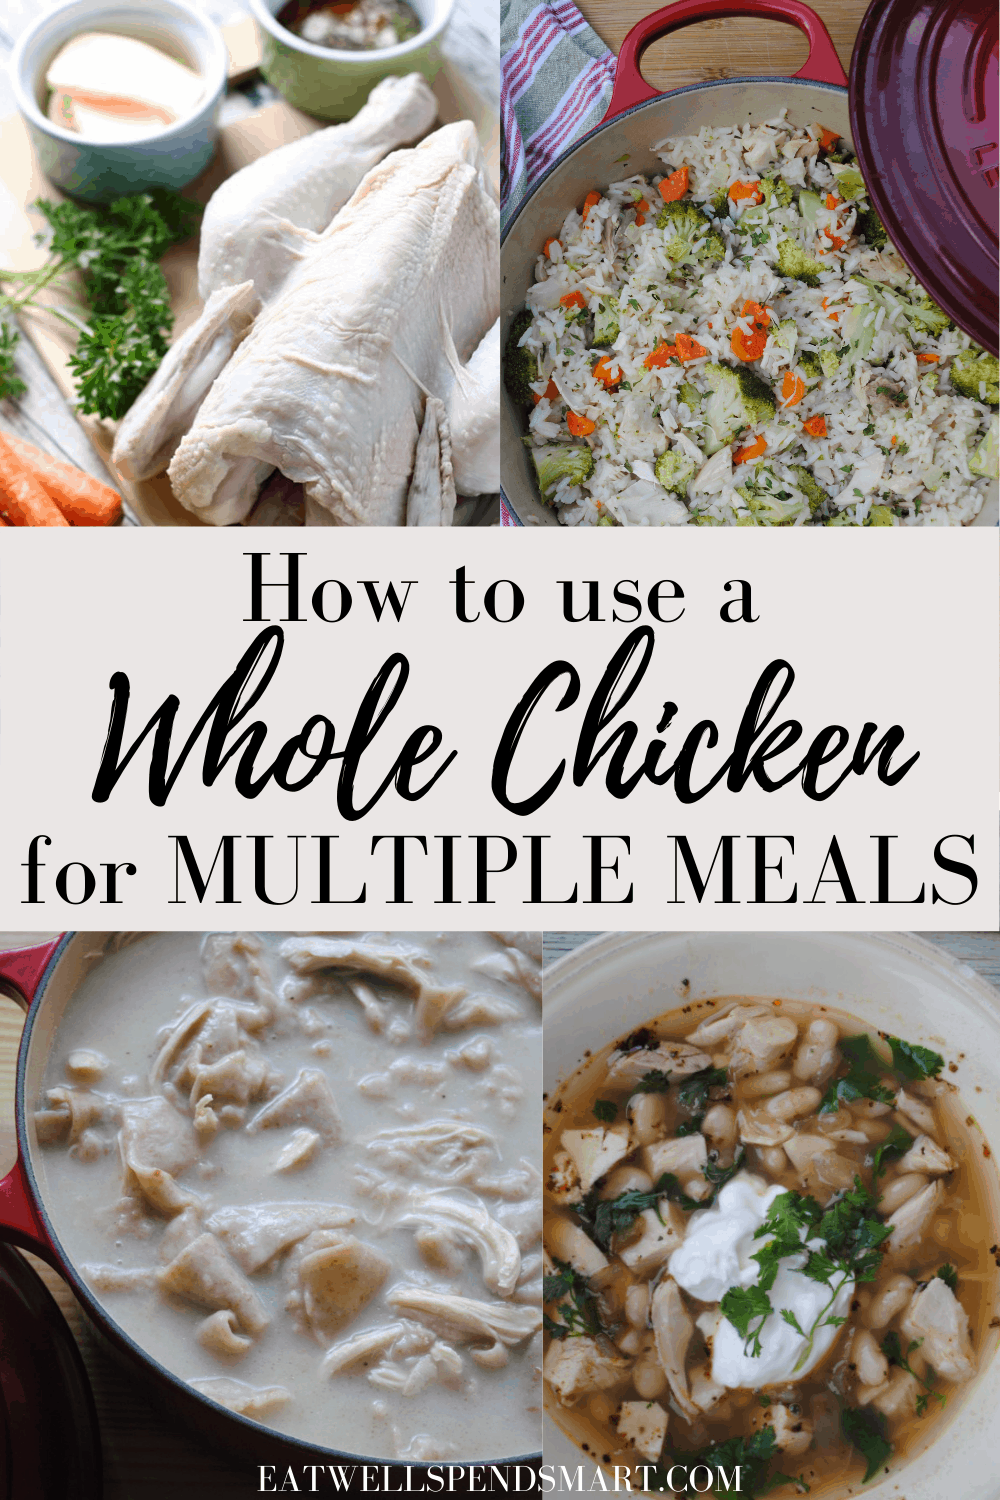 How to use a whole chicken multiple meals